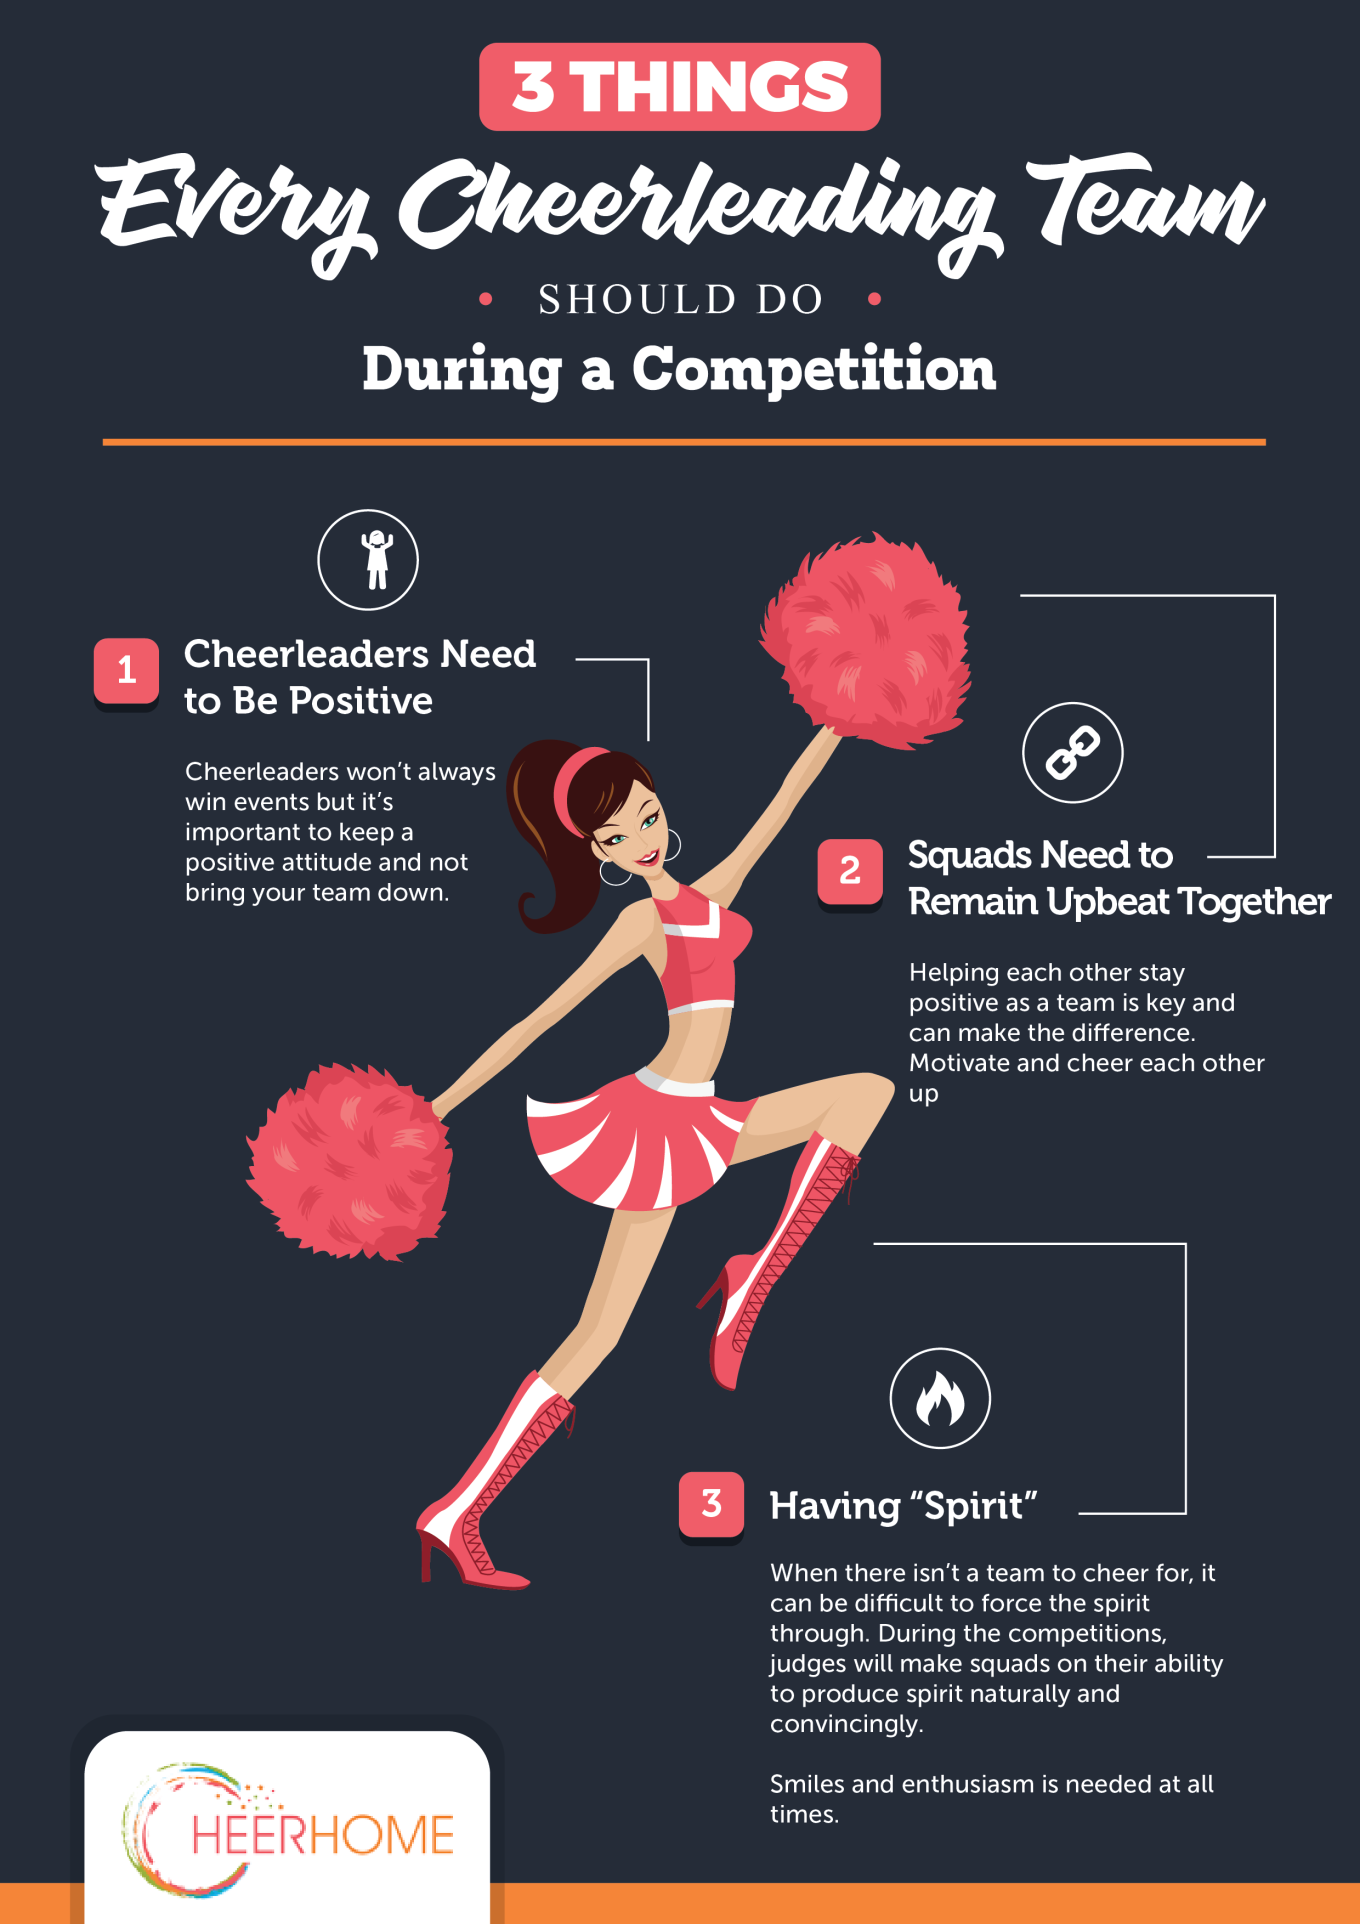 Top 3 Things Every Cheerleading Team Should Do During Competition